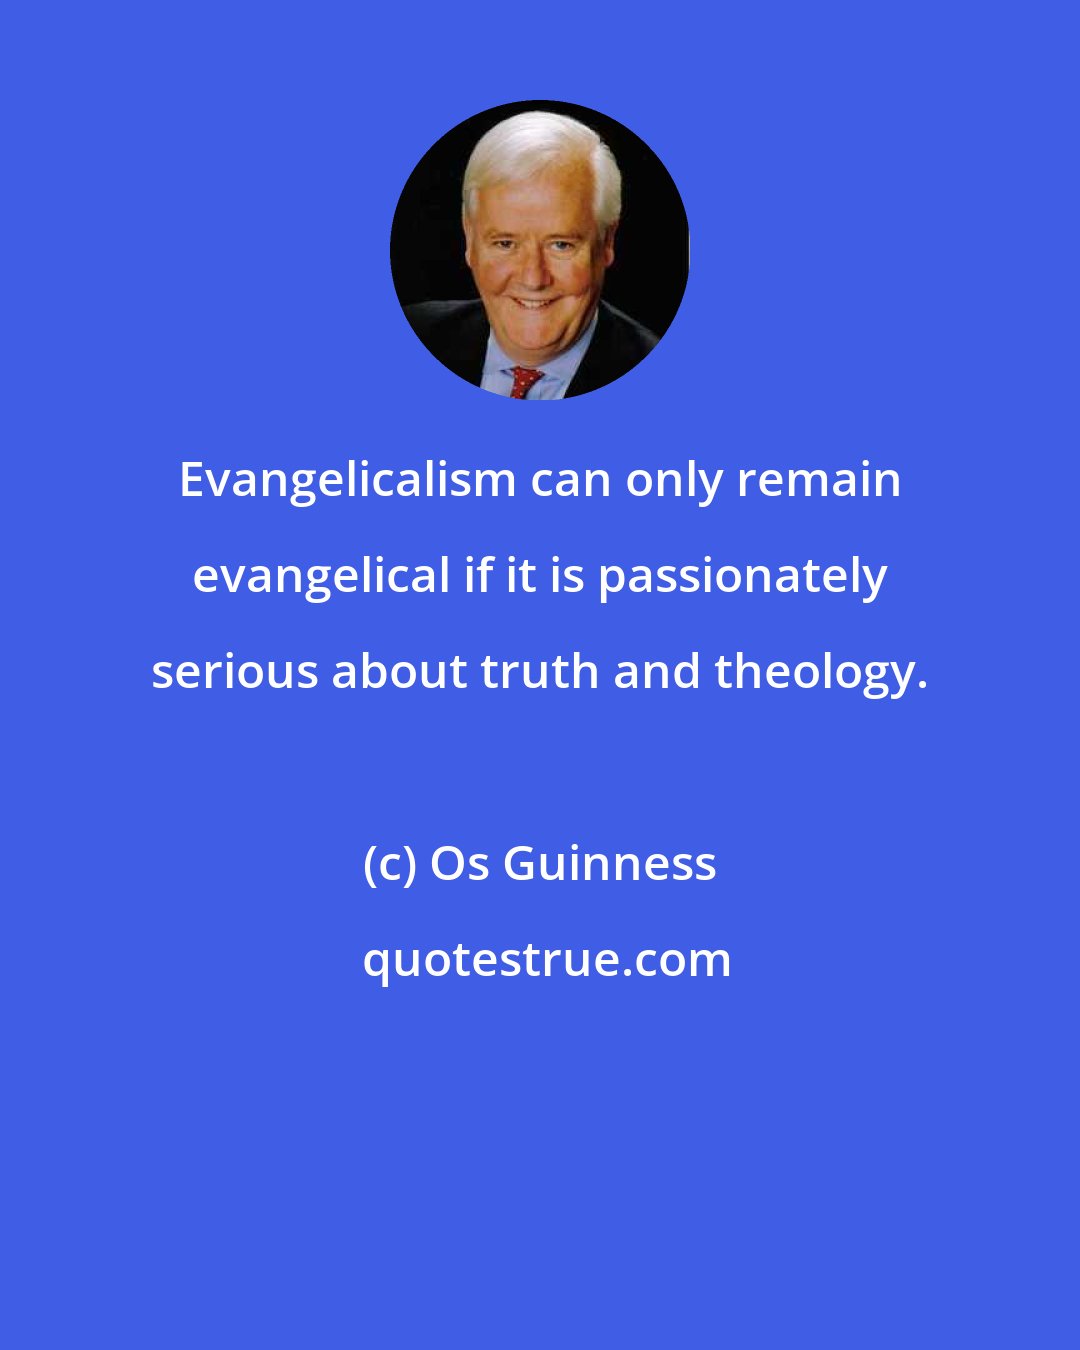 Os Guinness: Evangelicalism can only remain evangelical if it is passionately serious about truth and theology.